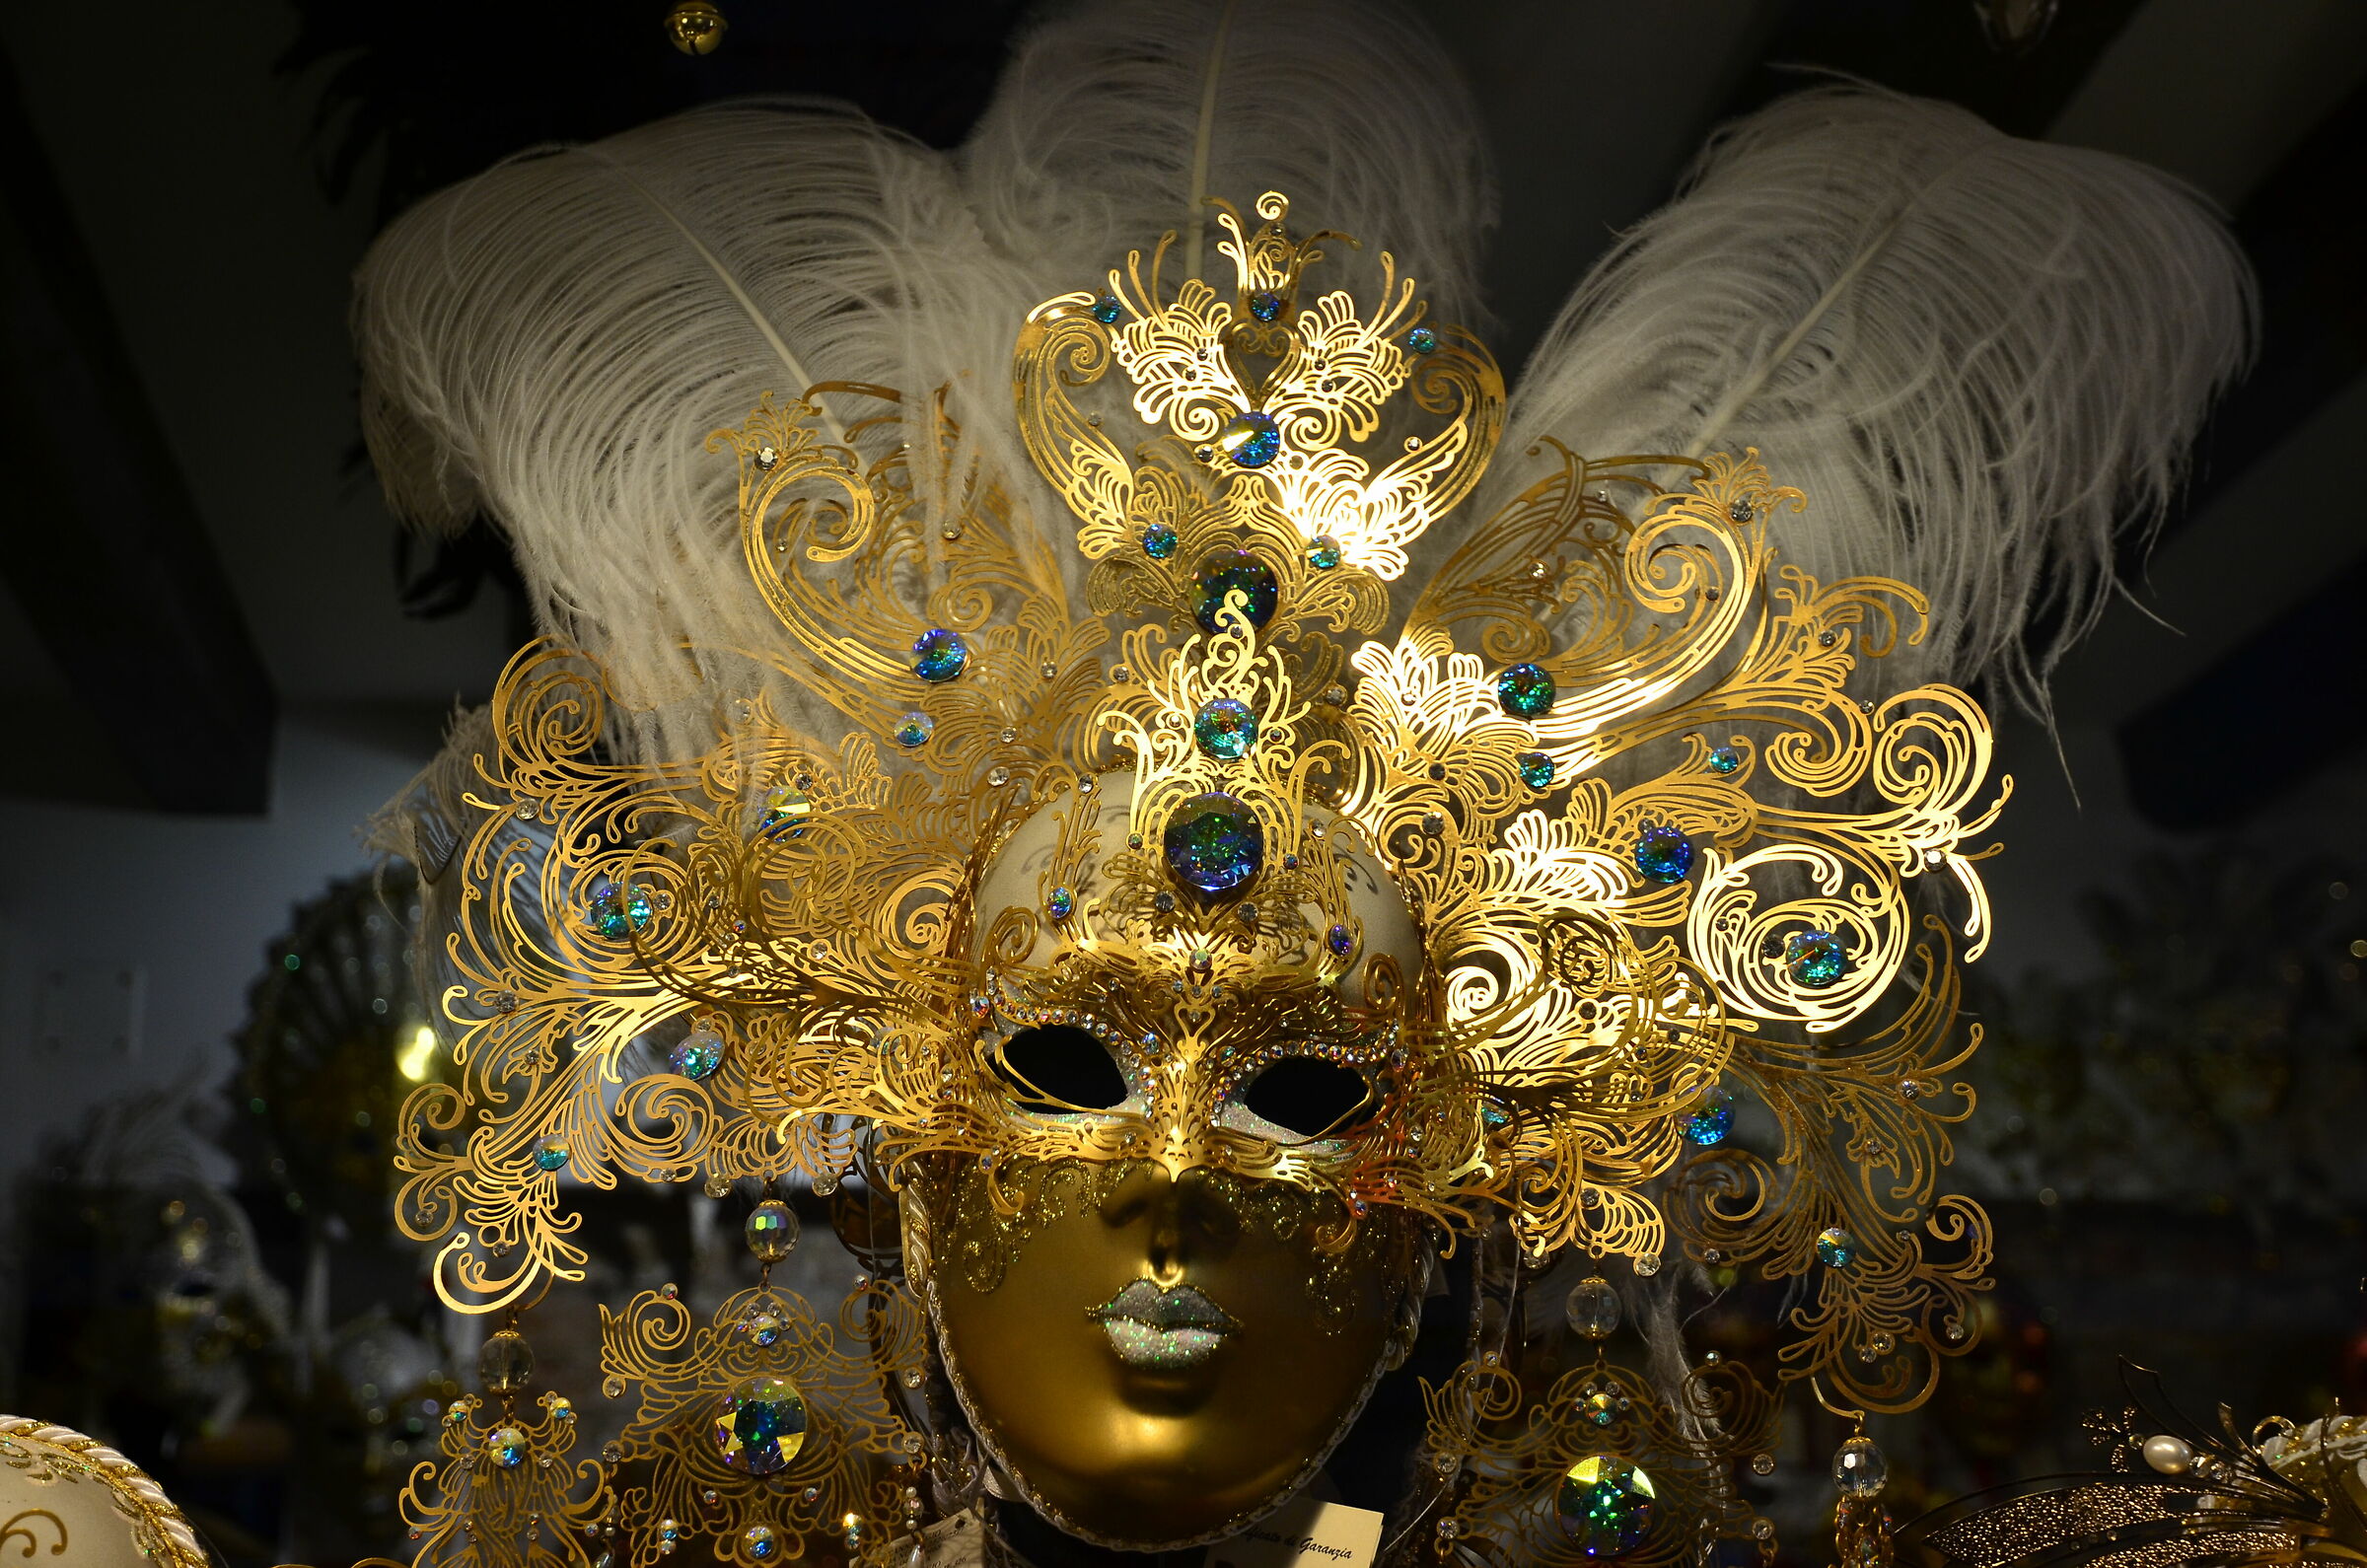 Venice and its masks...